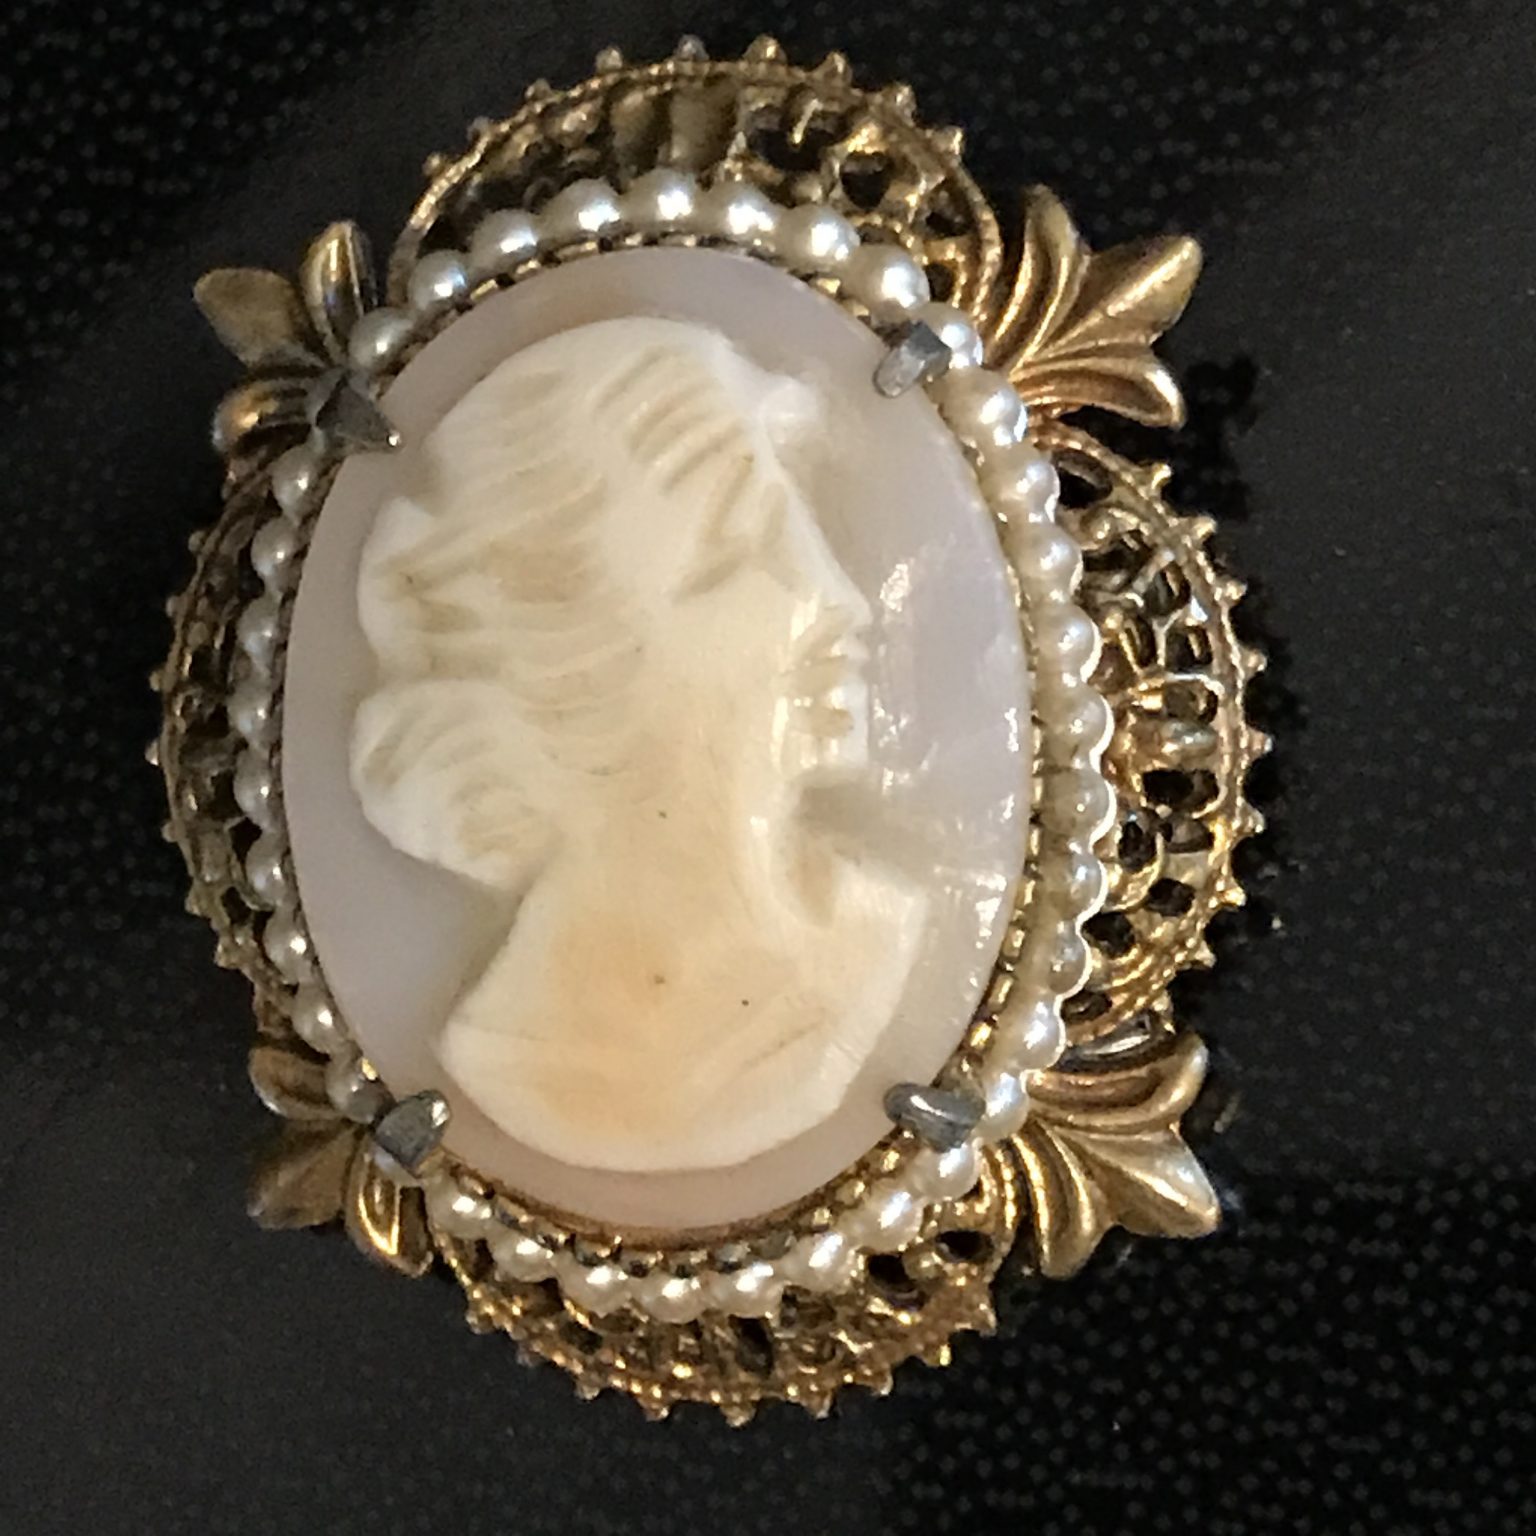 Vintage Cameo Pin Brooch Victorian style gold leaves with tiny pearls ...